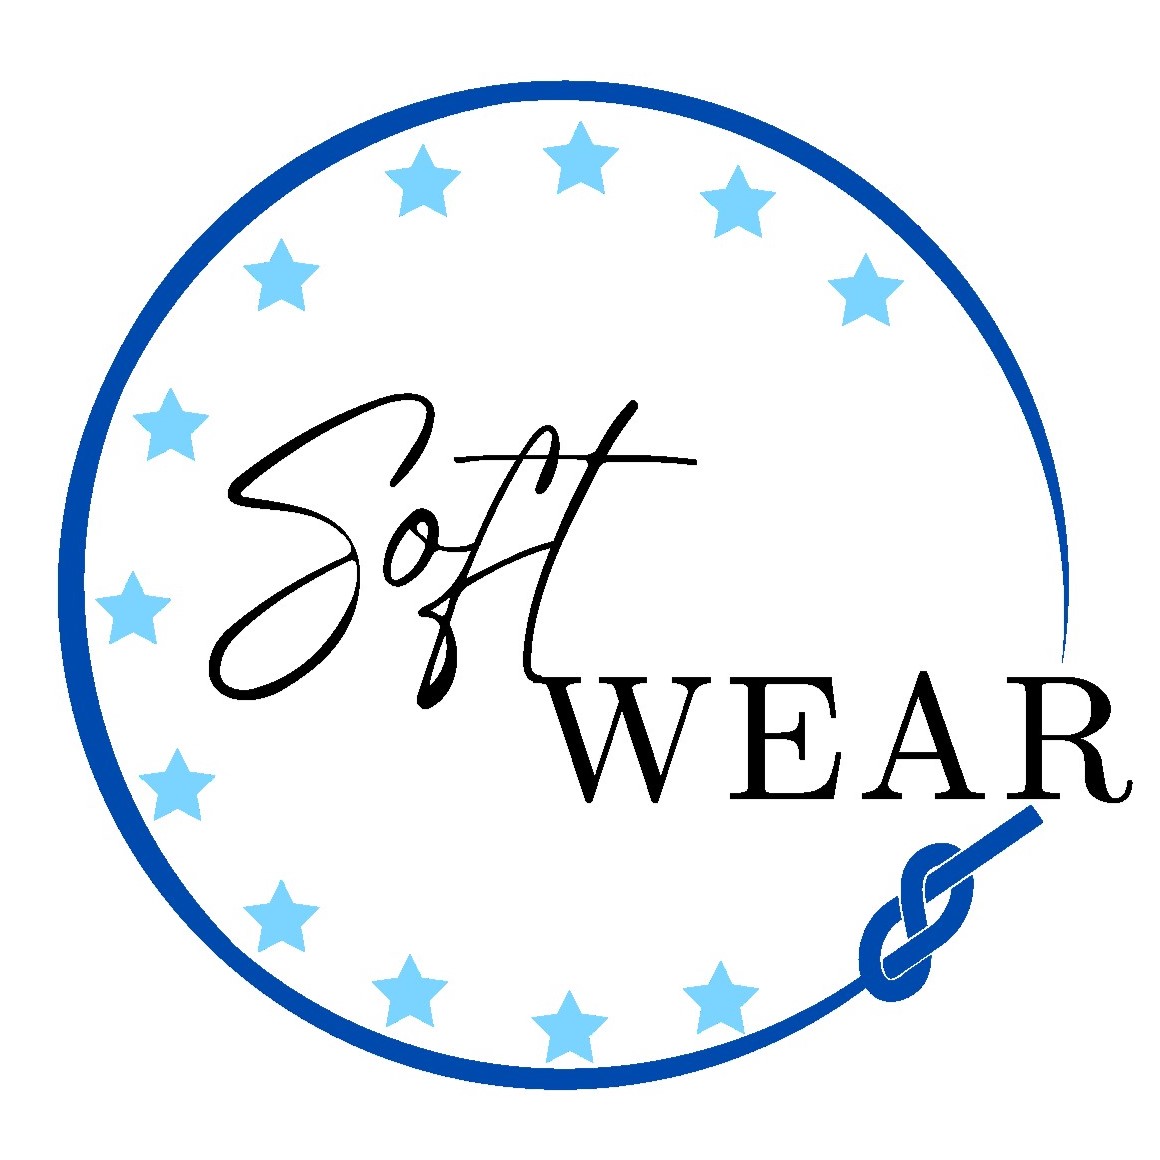 softwear logo, round blue thread with knot at the end and light blue stars in the middle